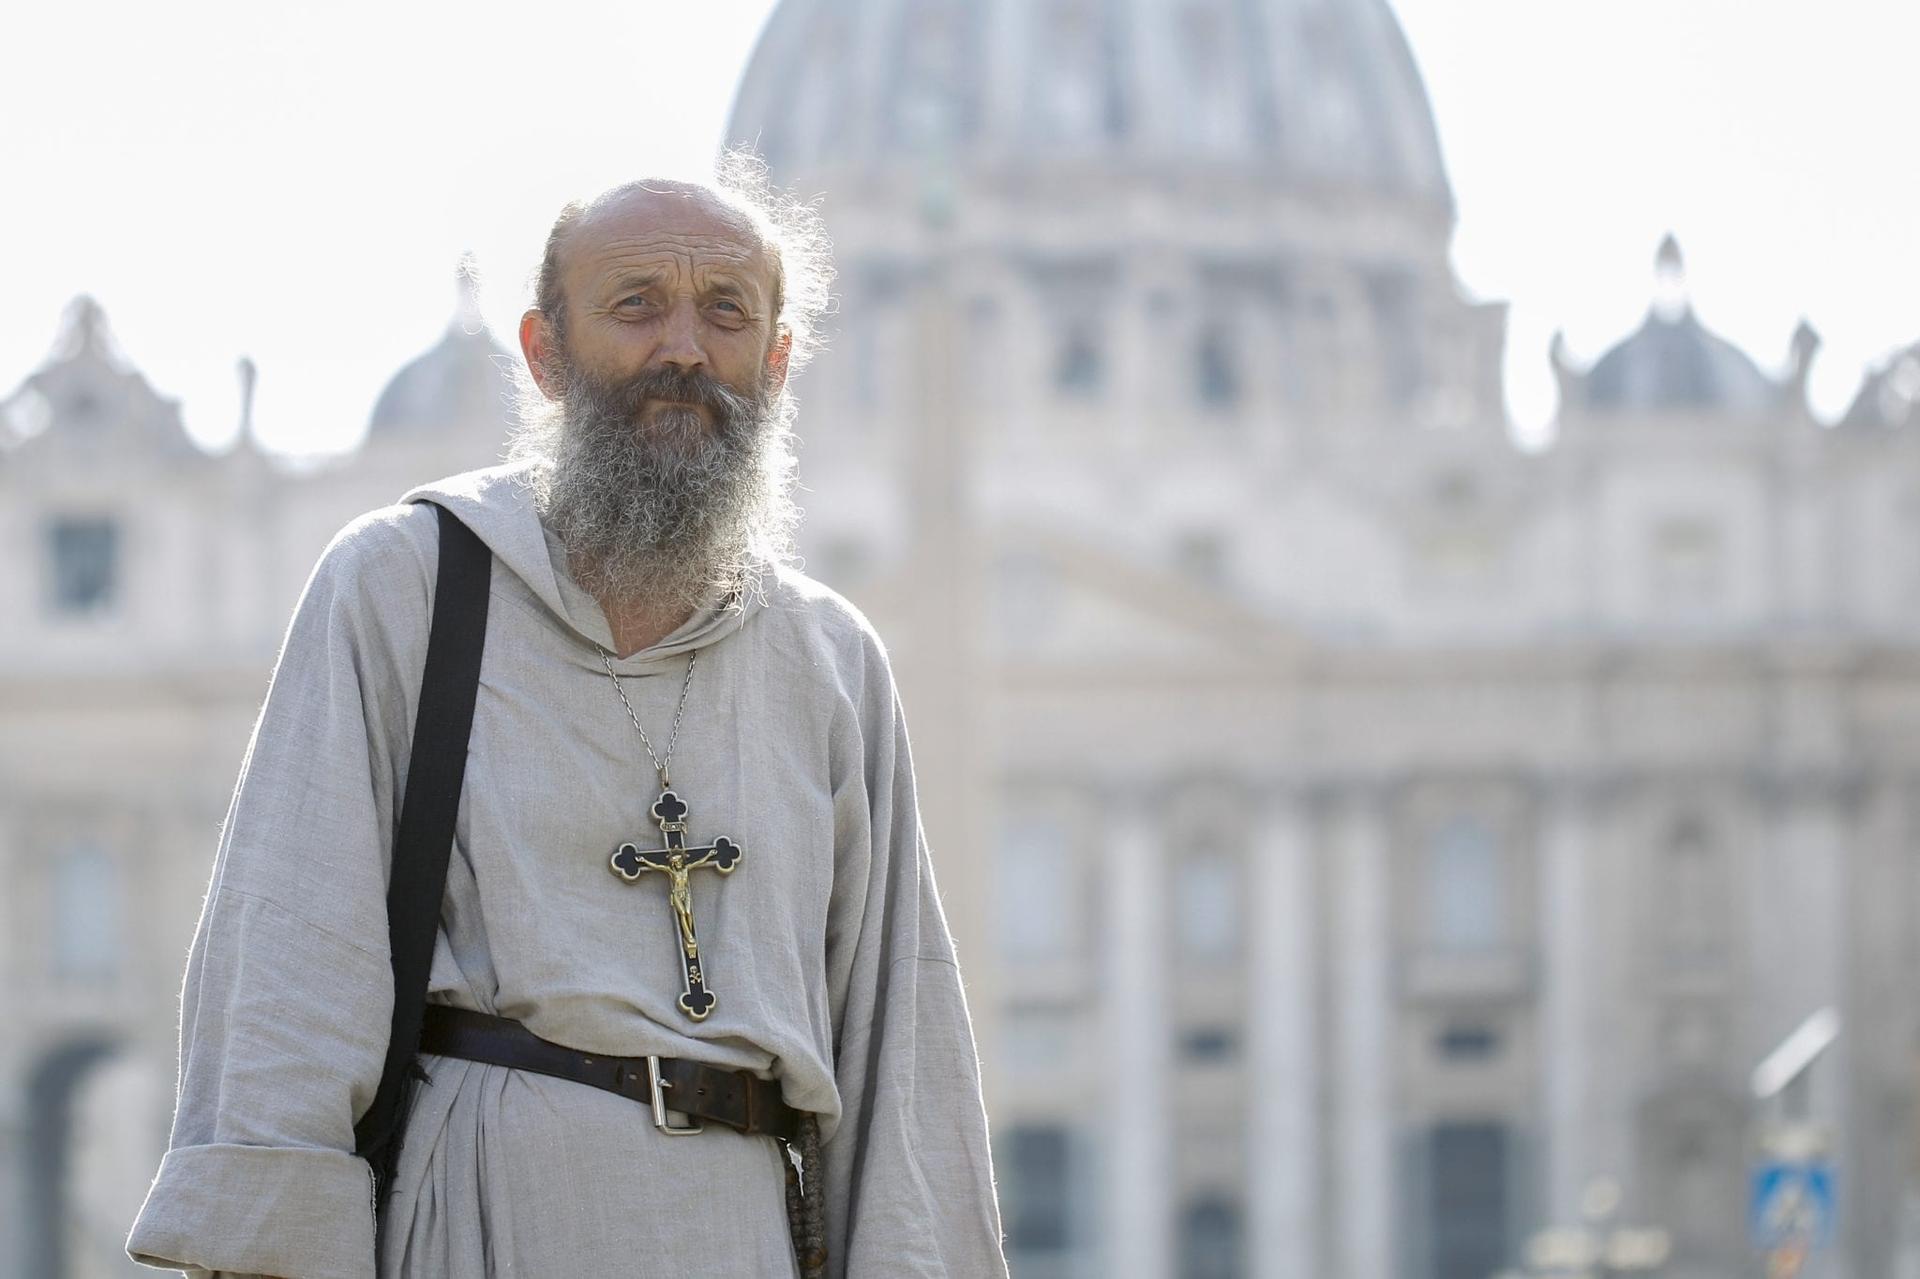 Missionary hermit: New priest recounts winding road to ordination